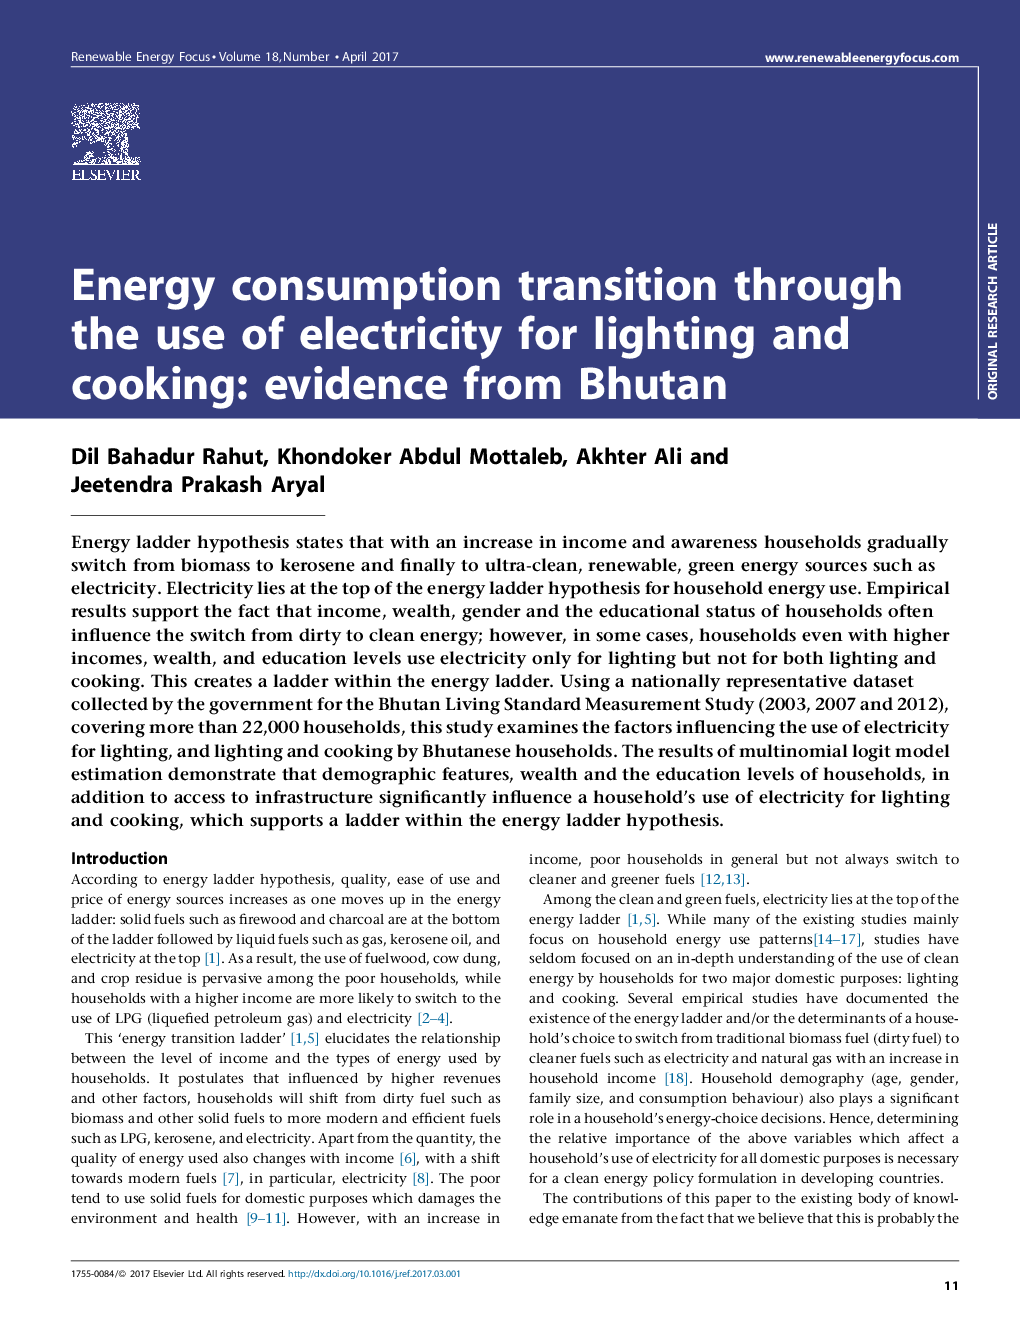 Energy consumption transition through the use of electricity for lighting and cooking: evidence from Bhutan